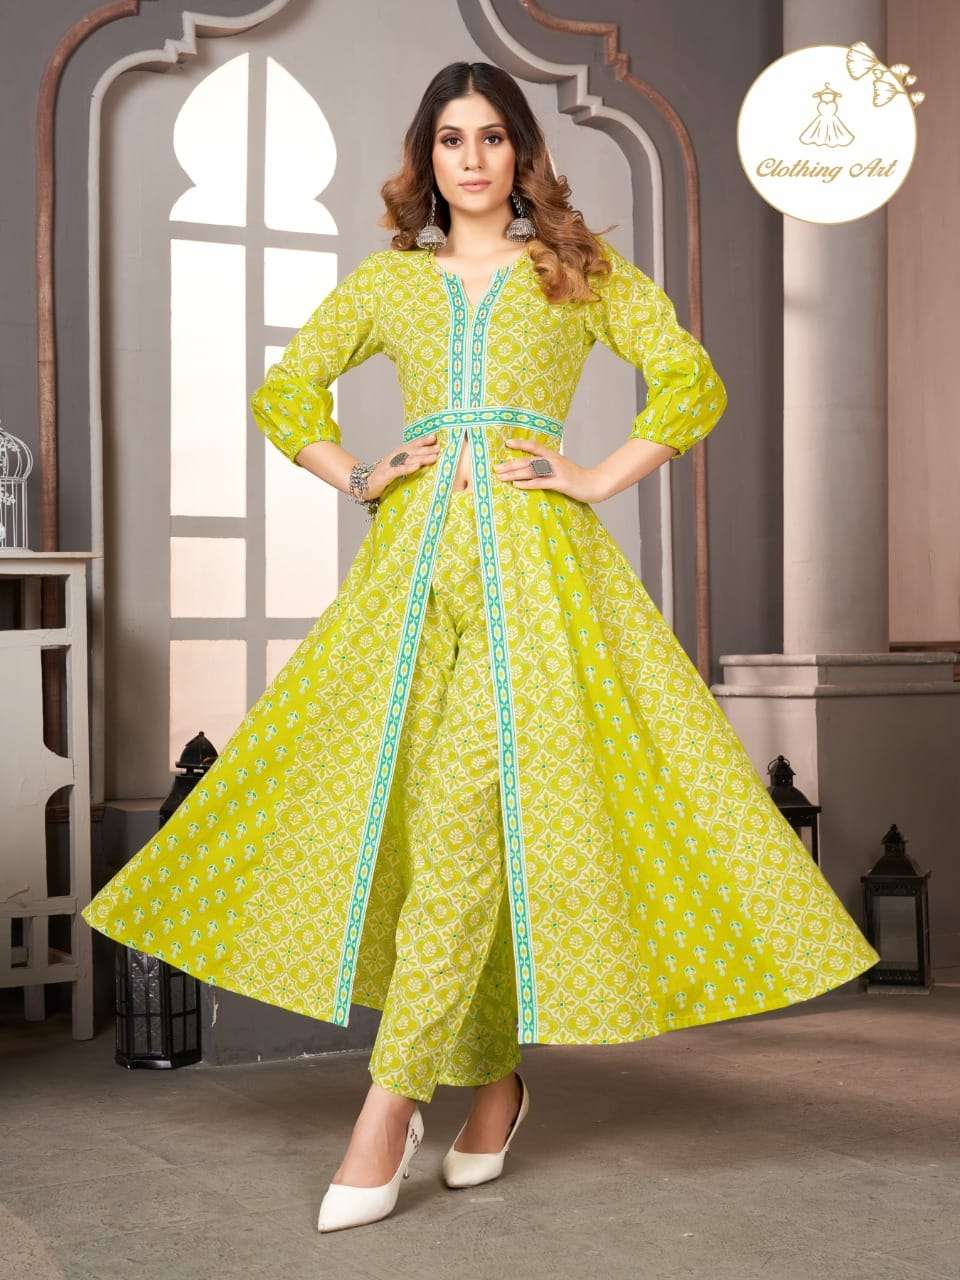 Buy KAJAL STYLE Traditional Indo Western Kurti Skirt for Women Kurta All  ocaasion wear Women Suits Size XL Bust Size- 44' inches at Amazon.in